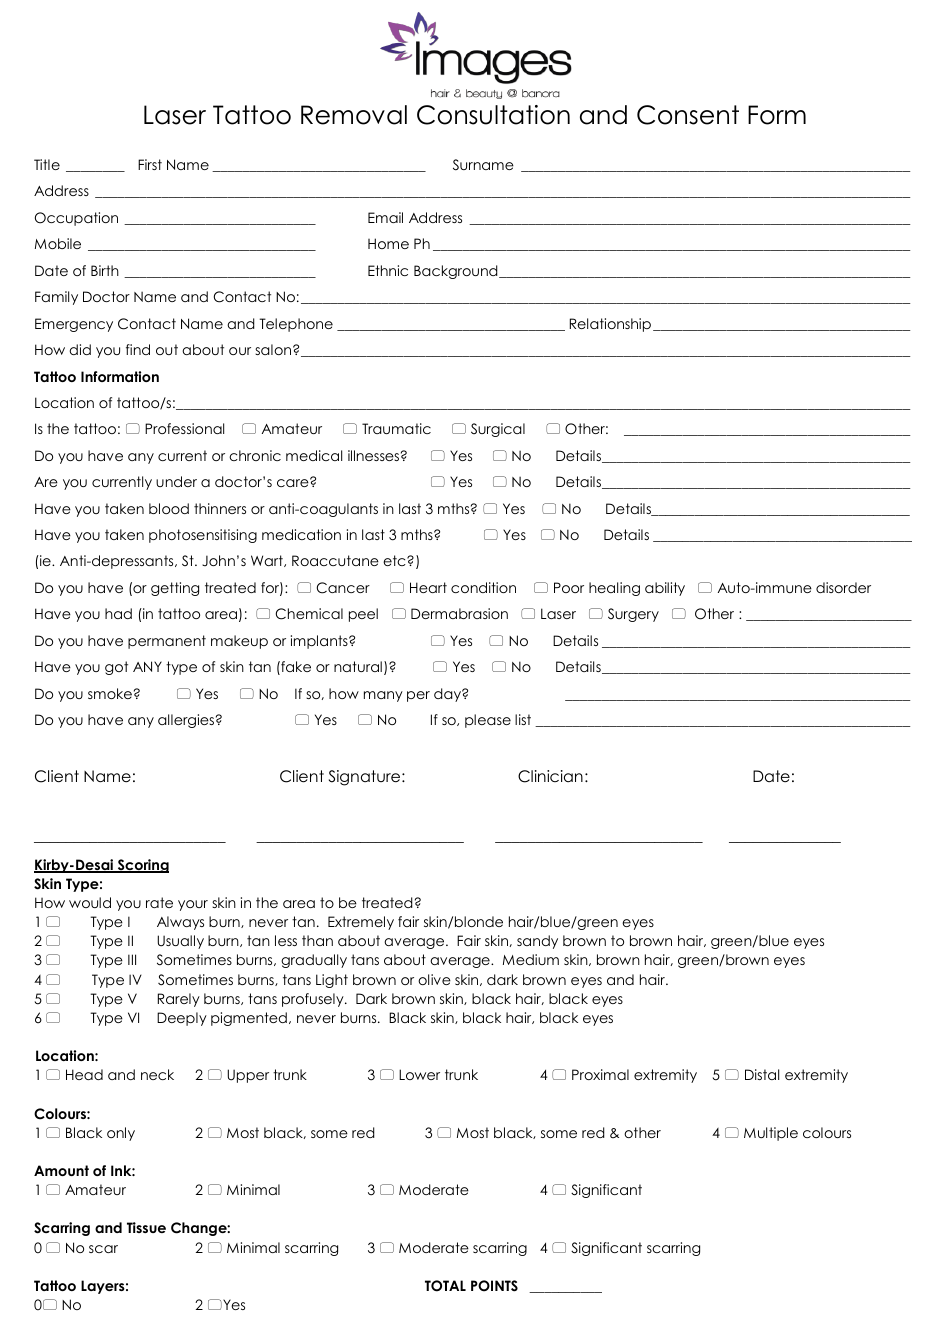 Laser Tattoo Removal Consultation and Consent Form - Images Hair and Beauty, Page 1